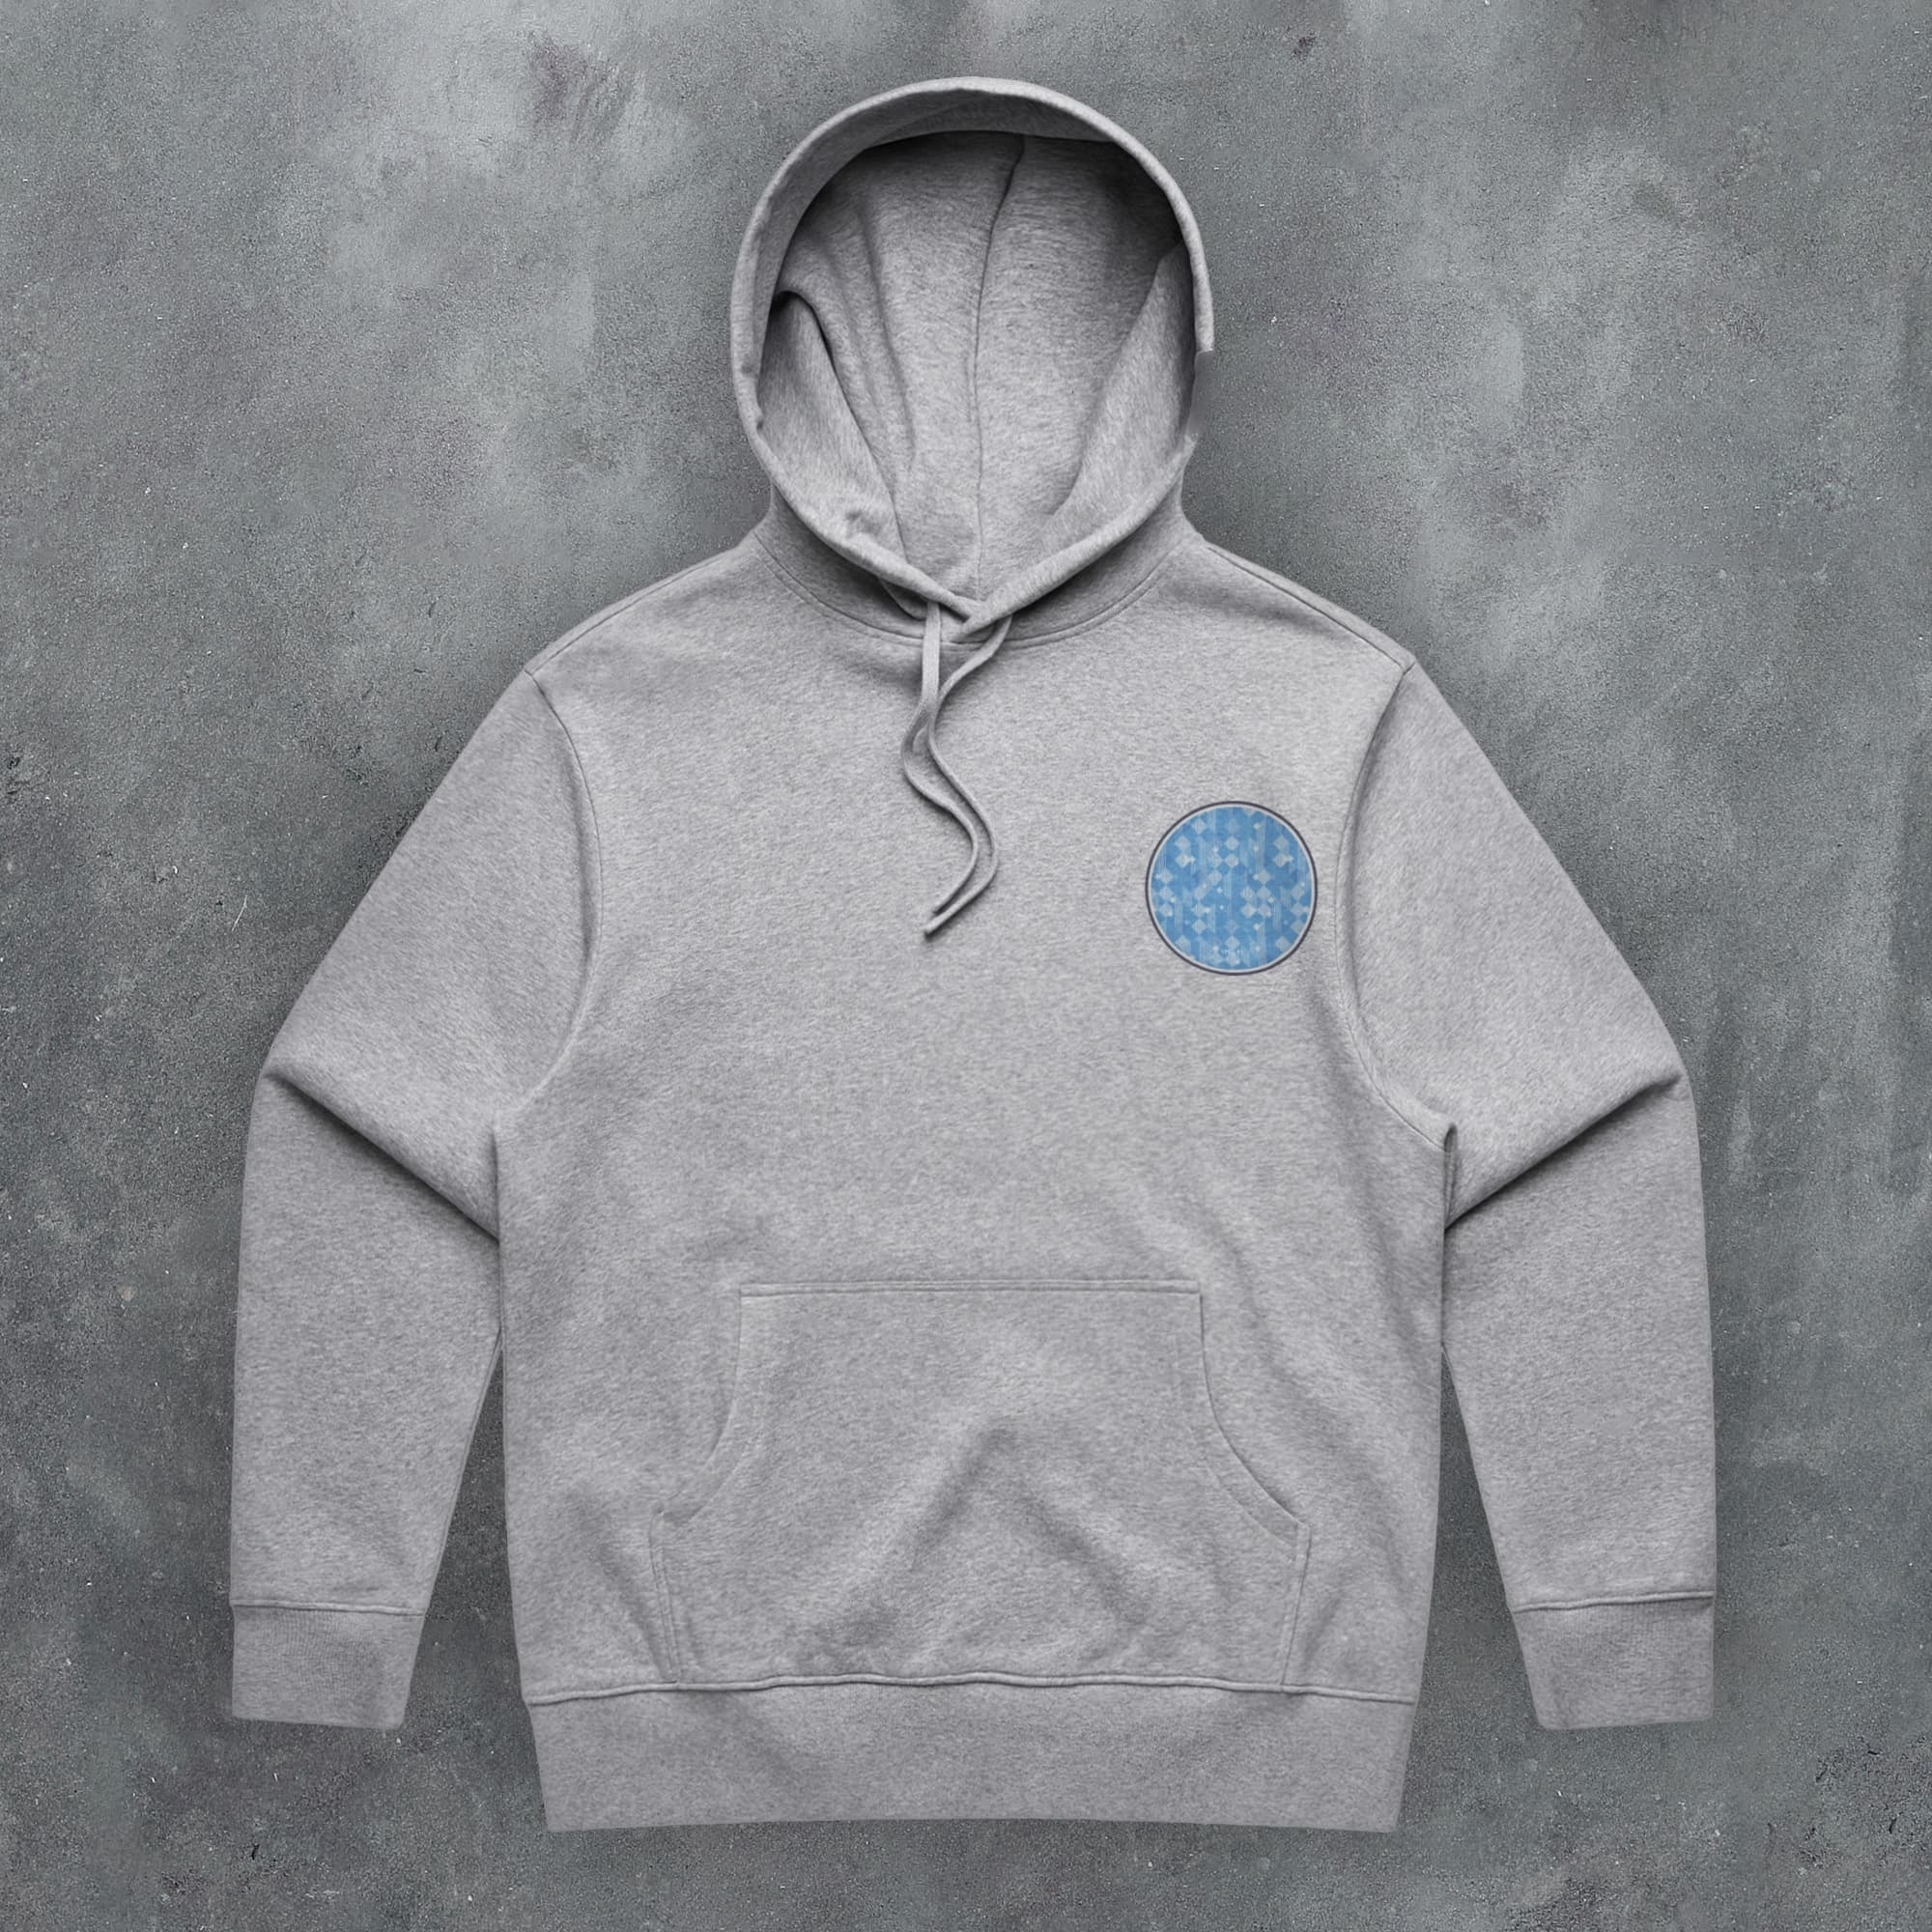 a grey hoodie with a blue circle on it